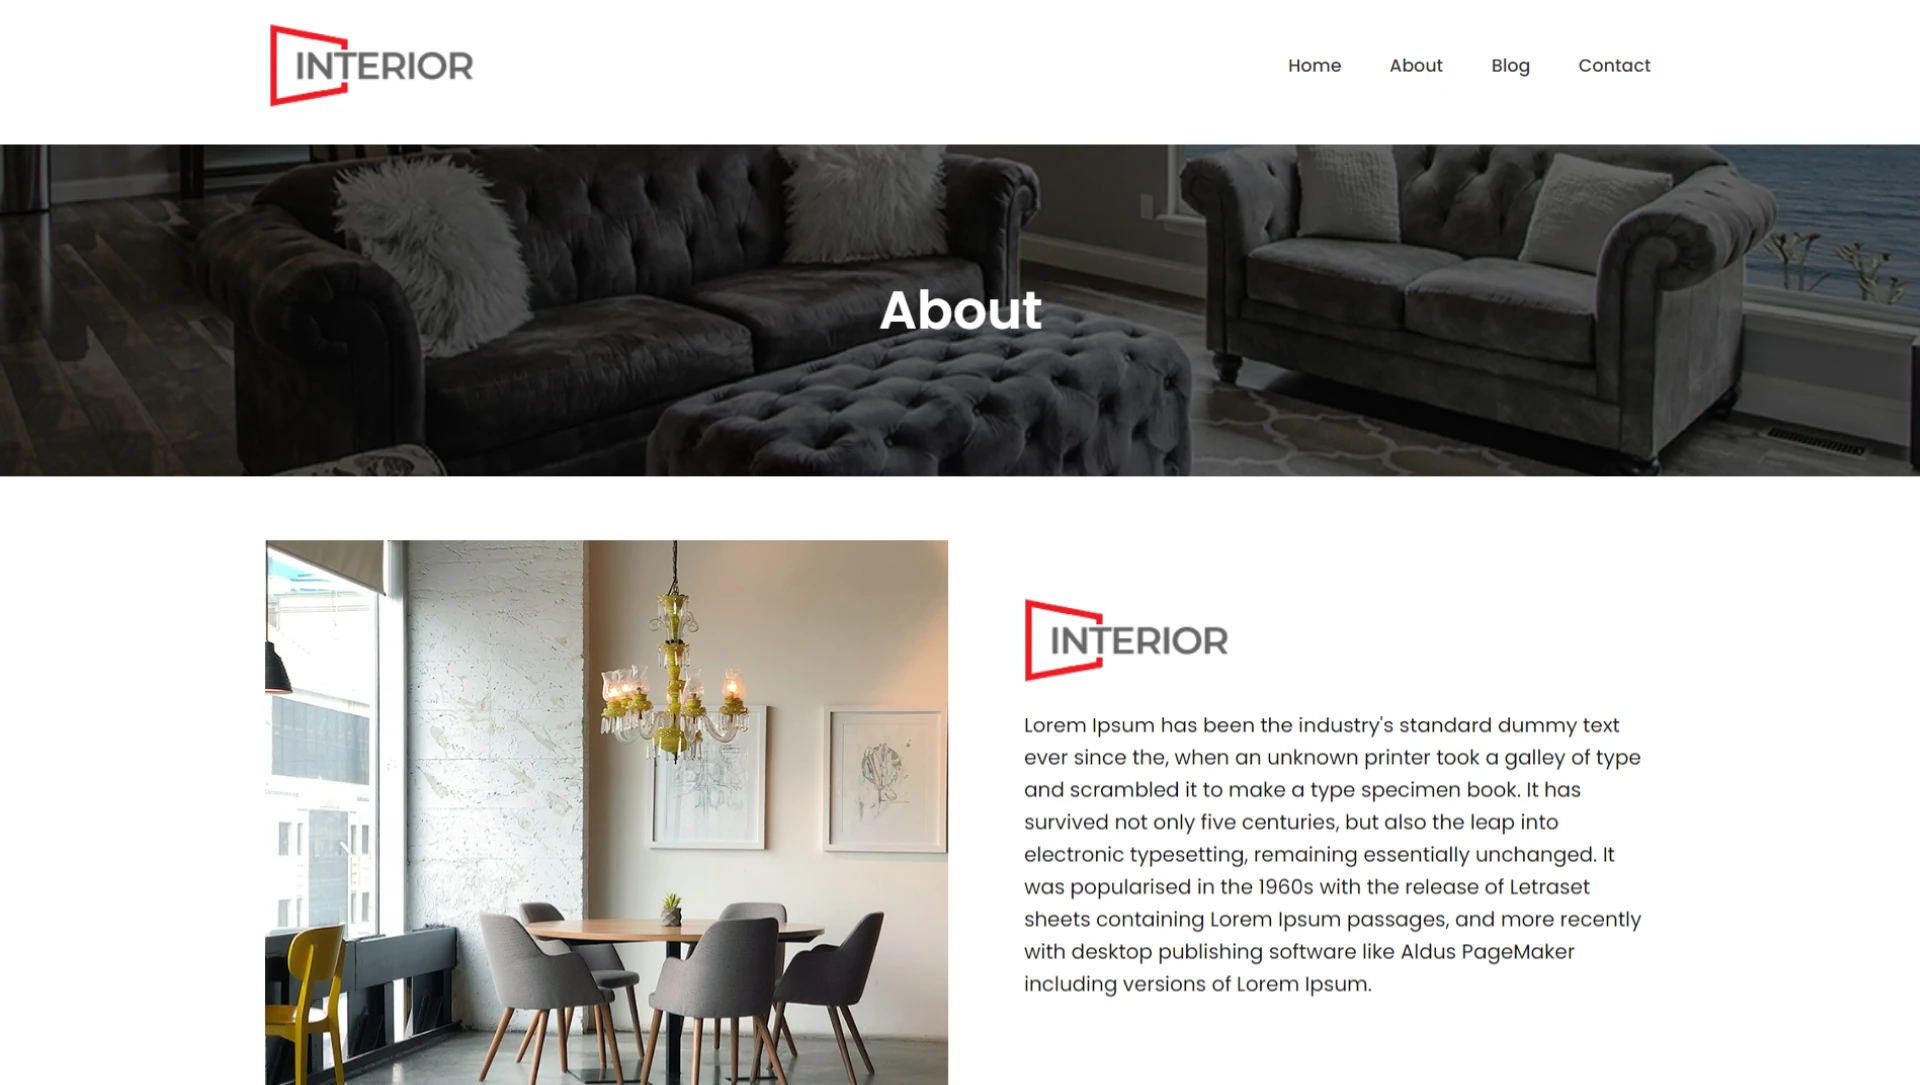 Interior design - About us Page